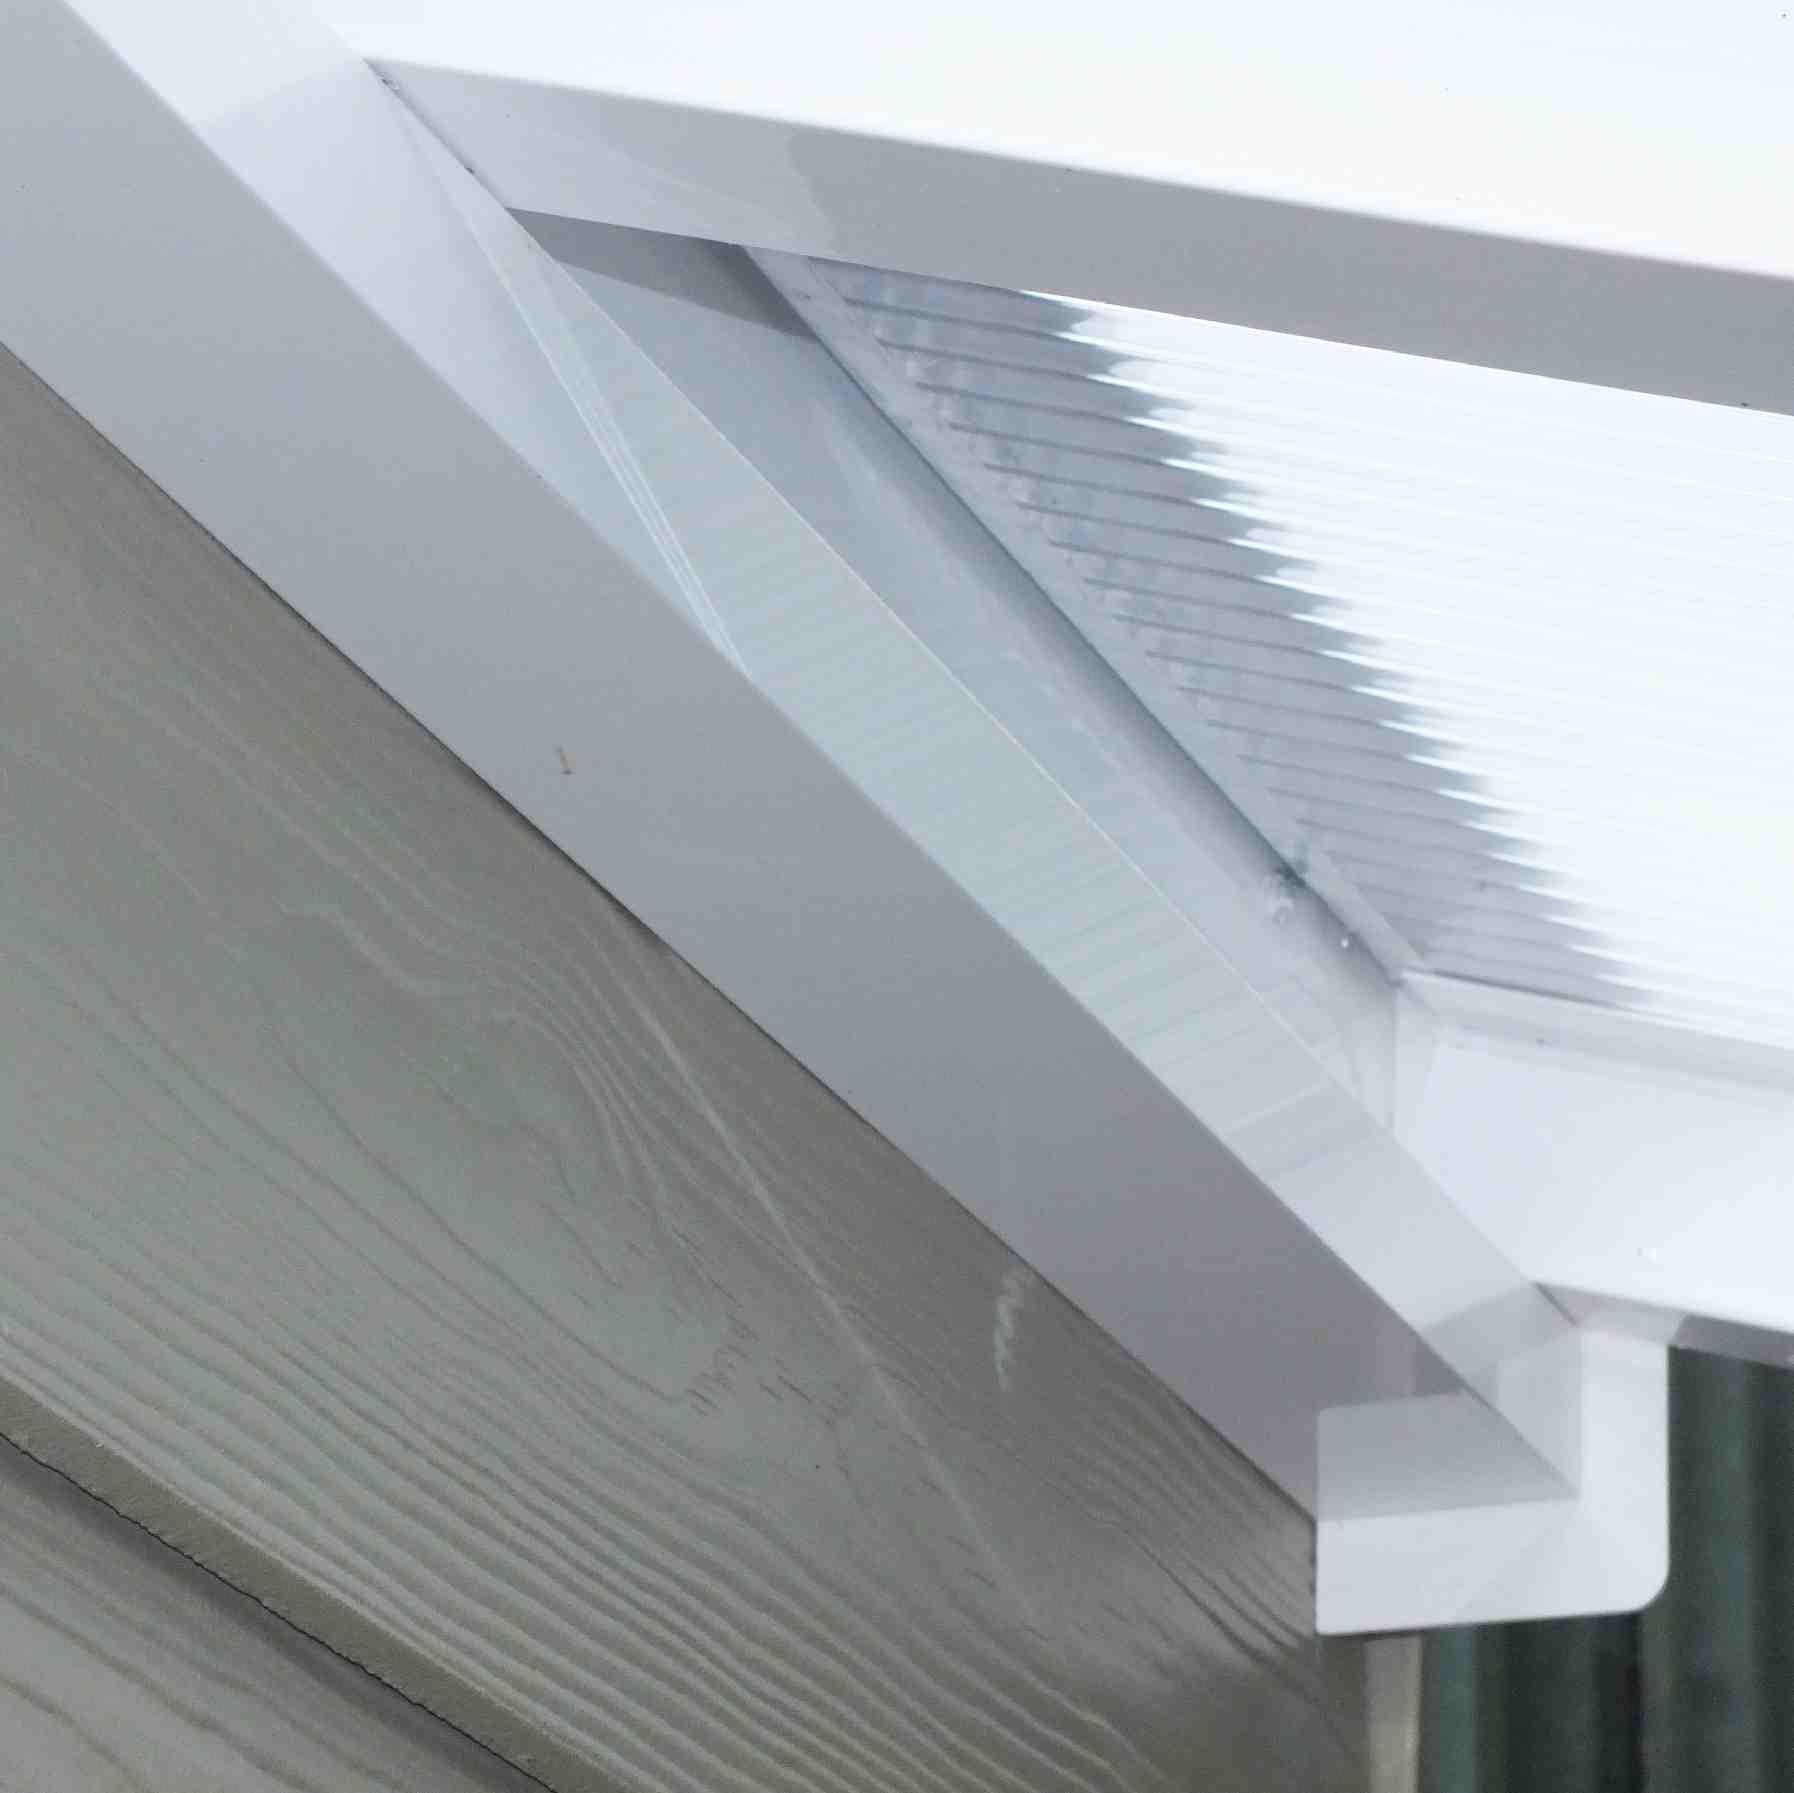 Great deals on Omega Verandah White with 16mm Polycarbonate Glazing - 11.6m (W) x 2.0m (P), (5) Supporting Posts